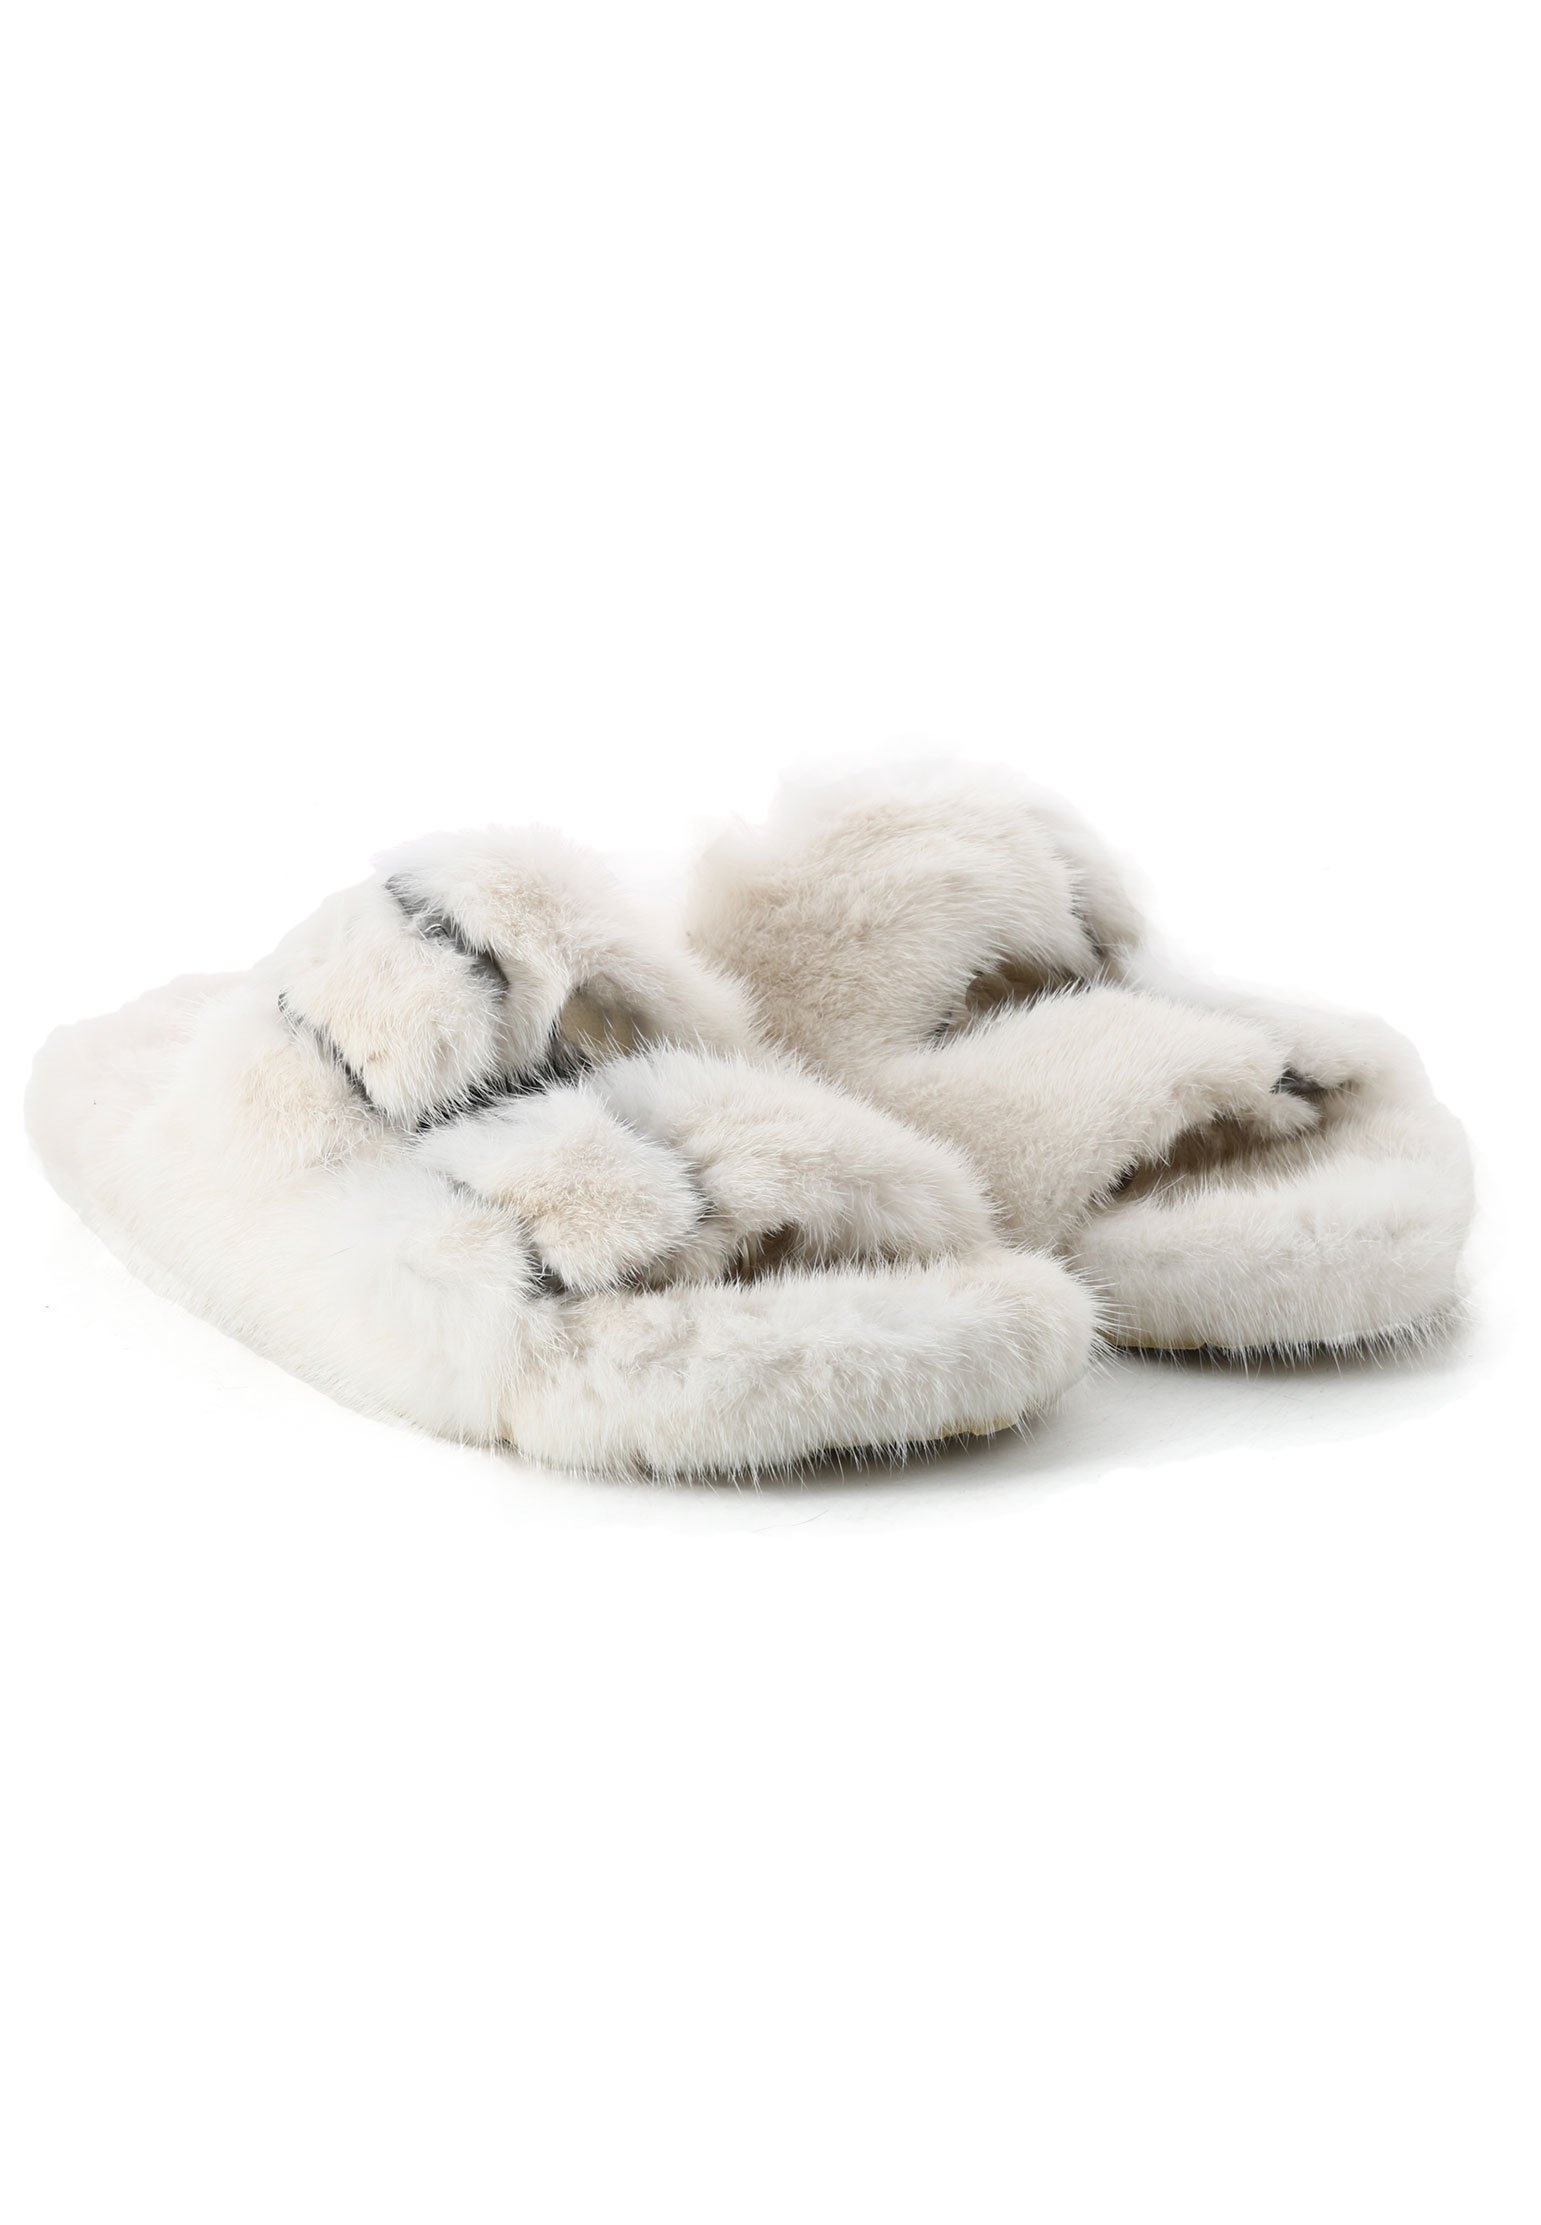 Slippers SAM RONE Color: white (Code: 217) in online store Allure